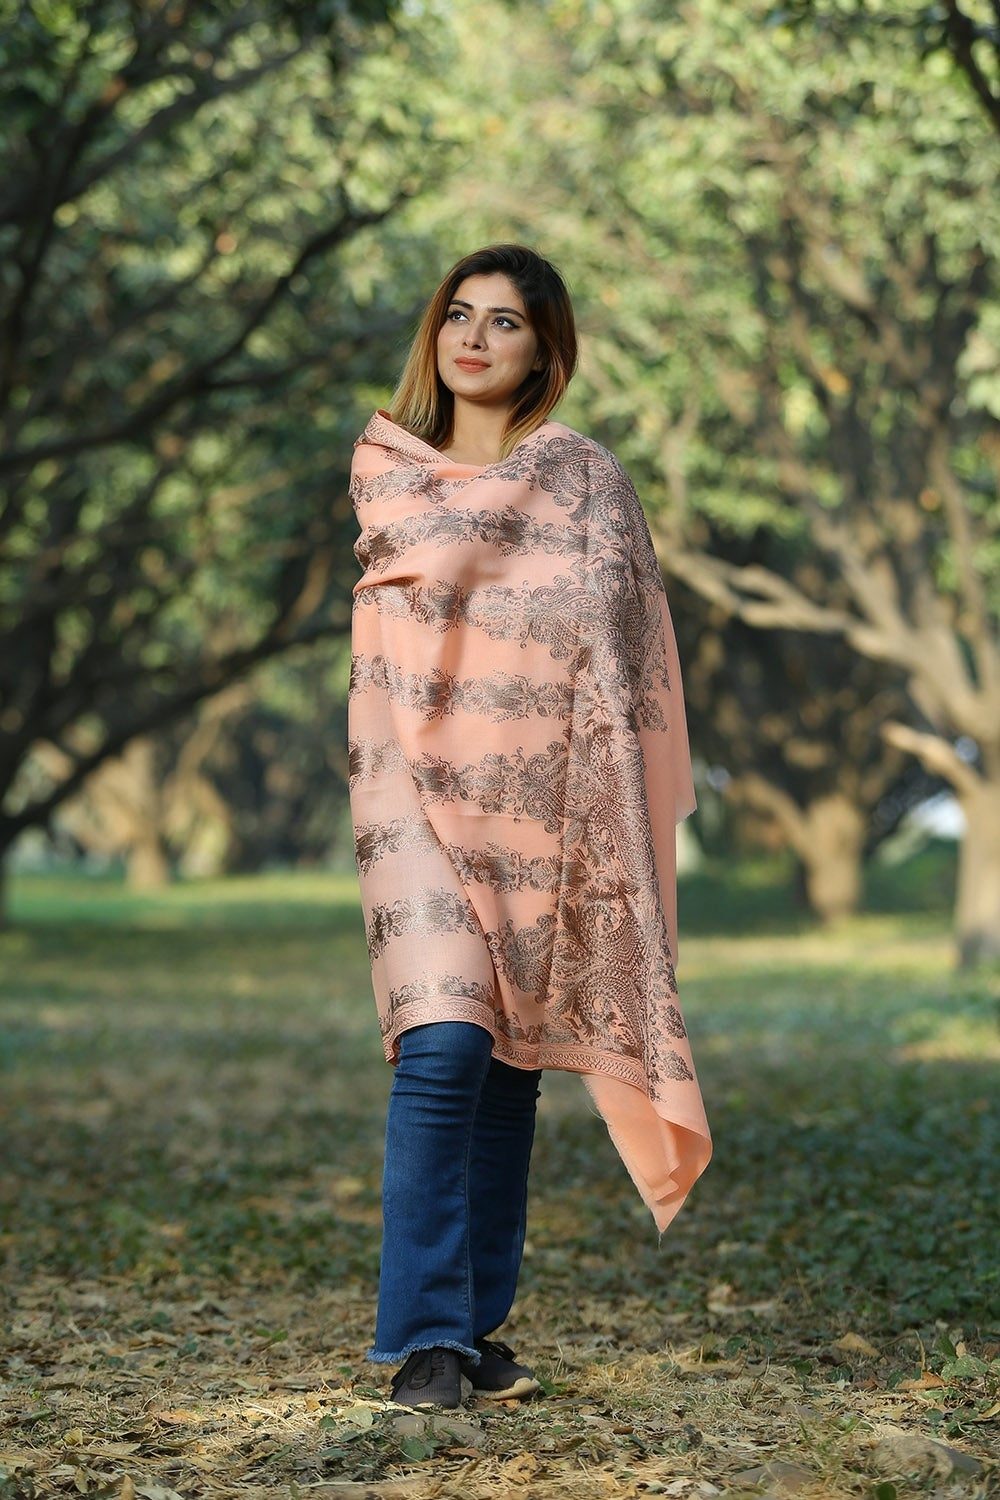 PEACH COLOUR SHAWL DEFINES FEMINISM AND ADDS GLAMOUR LOOKS